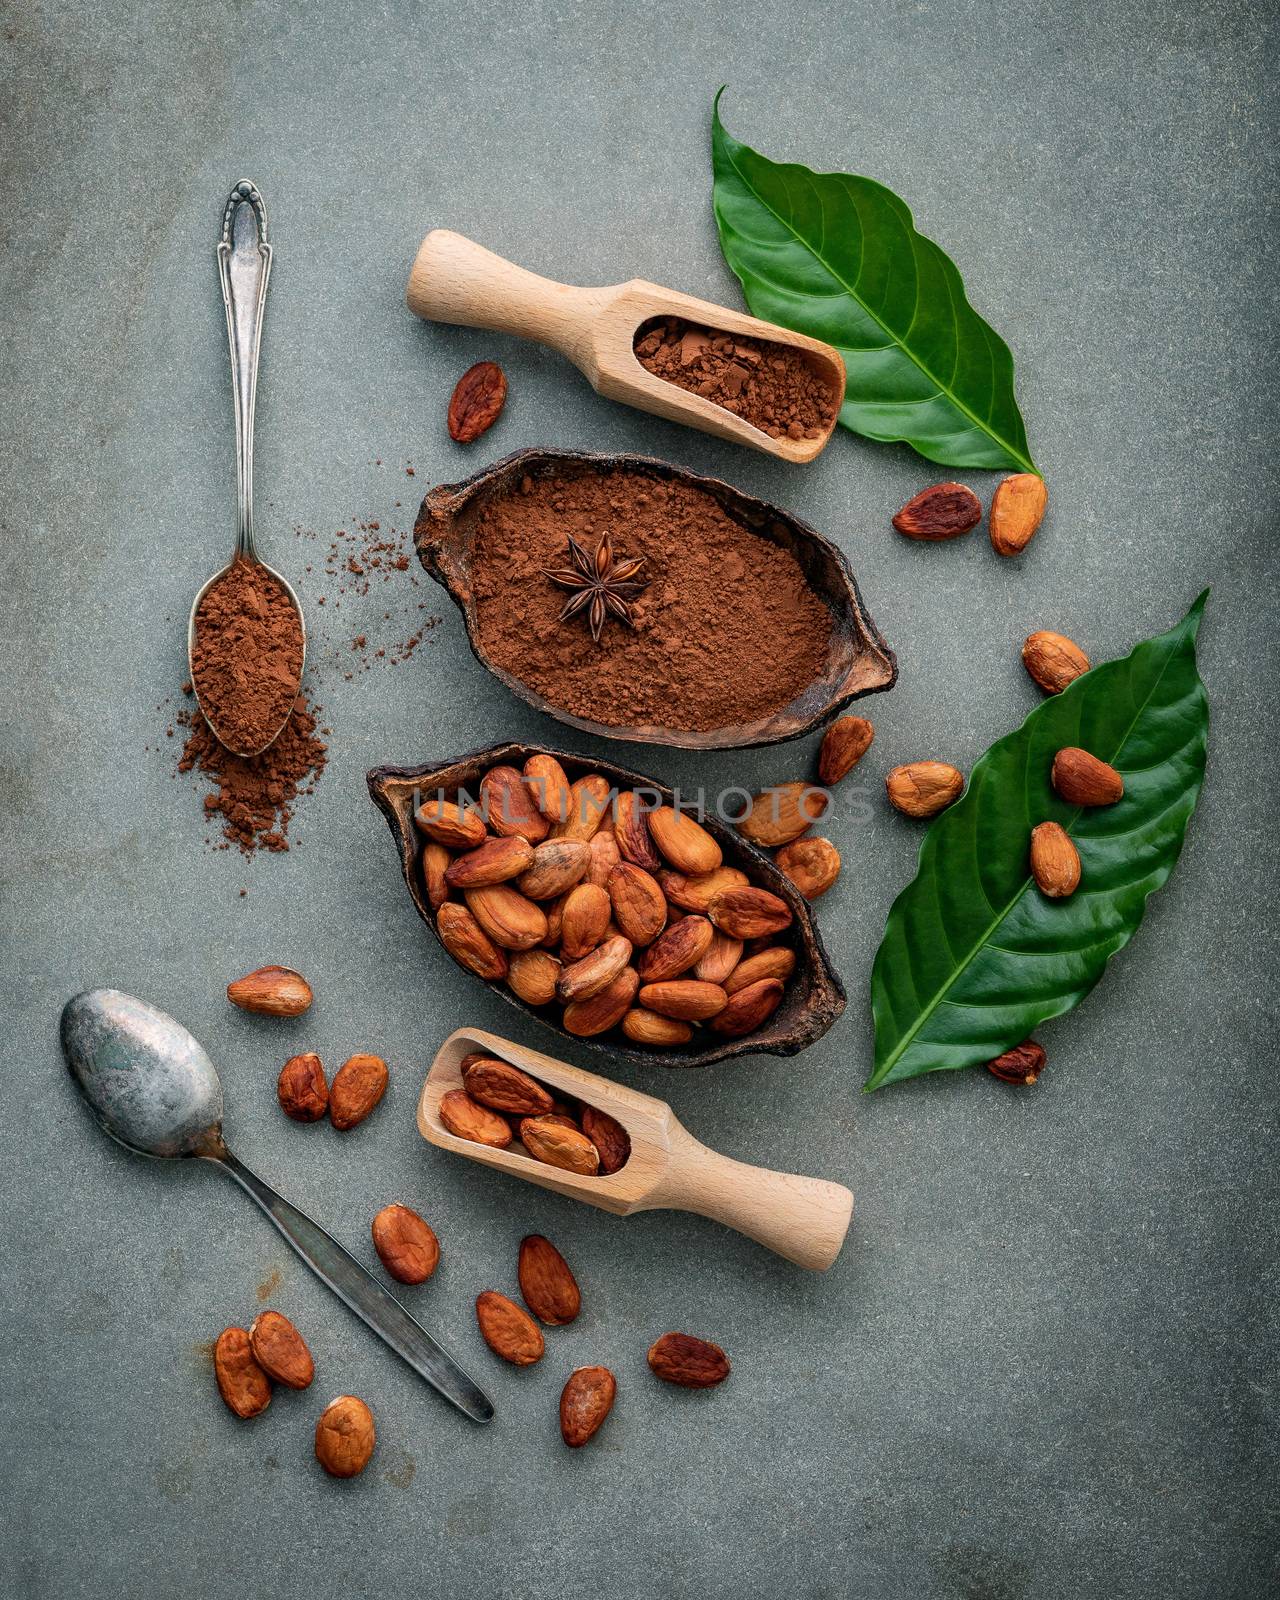 Cocoa powder and cacao beans on concrete background. by kerdkanno